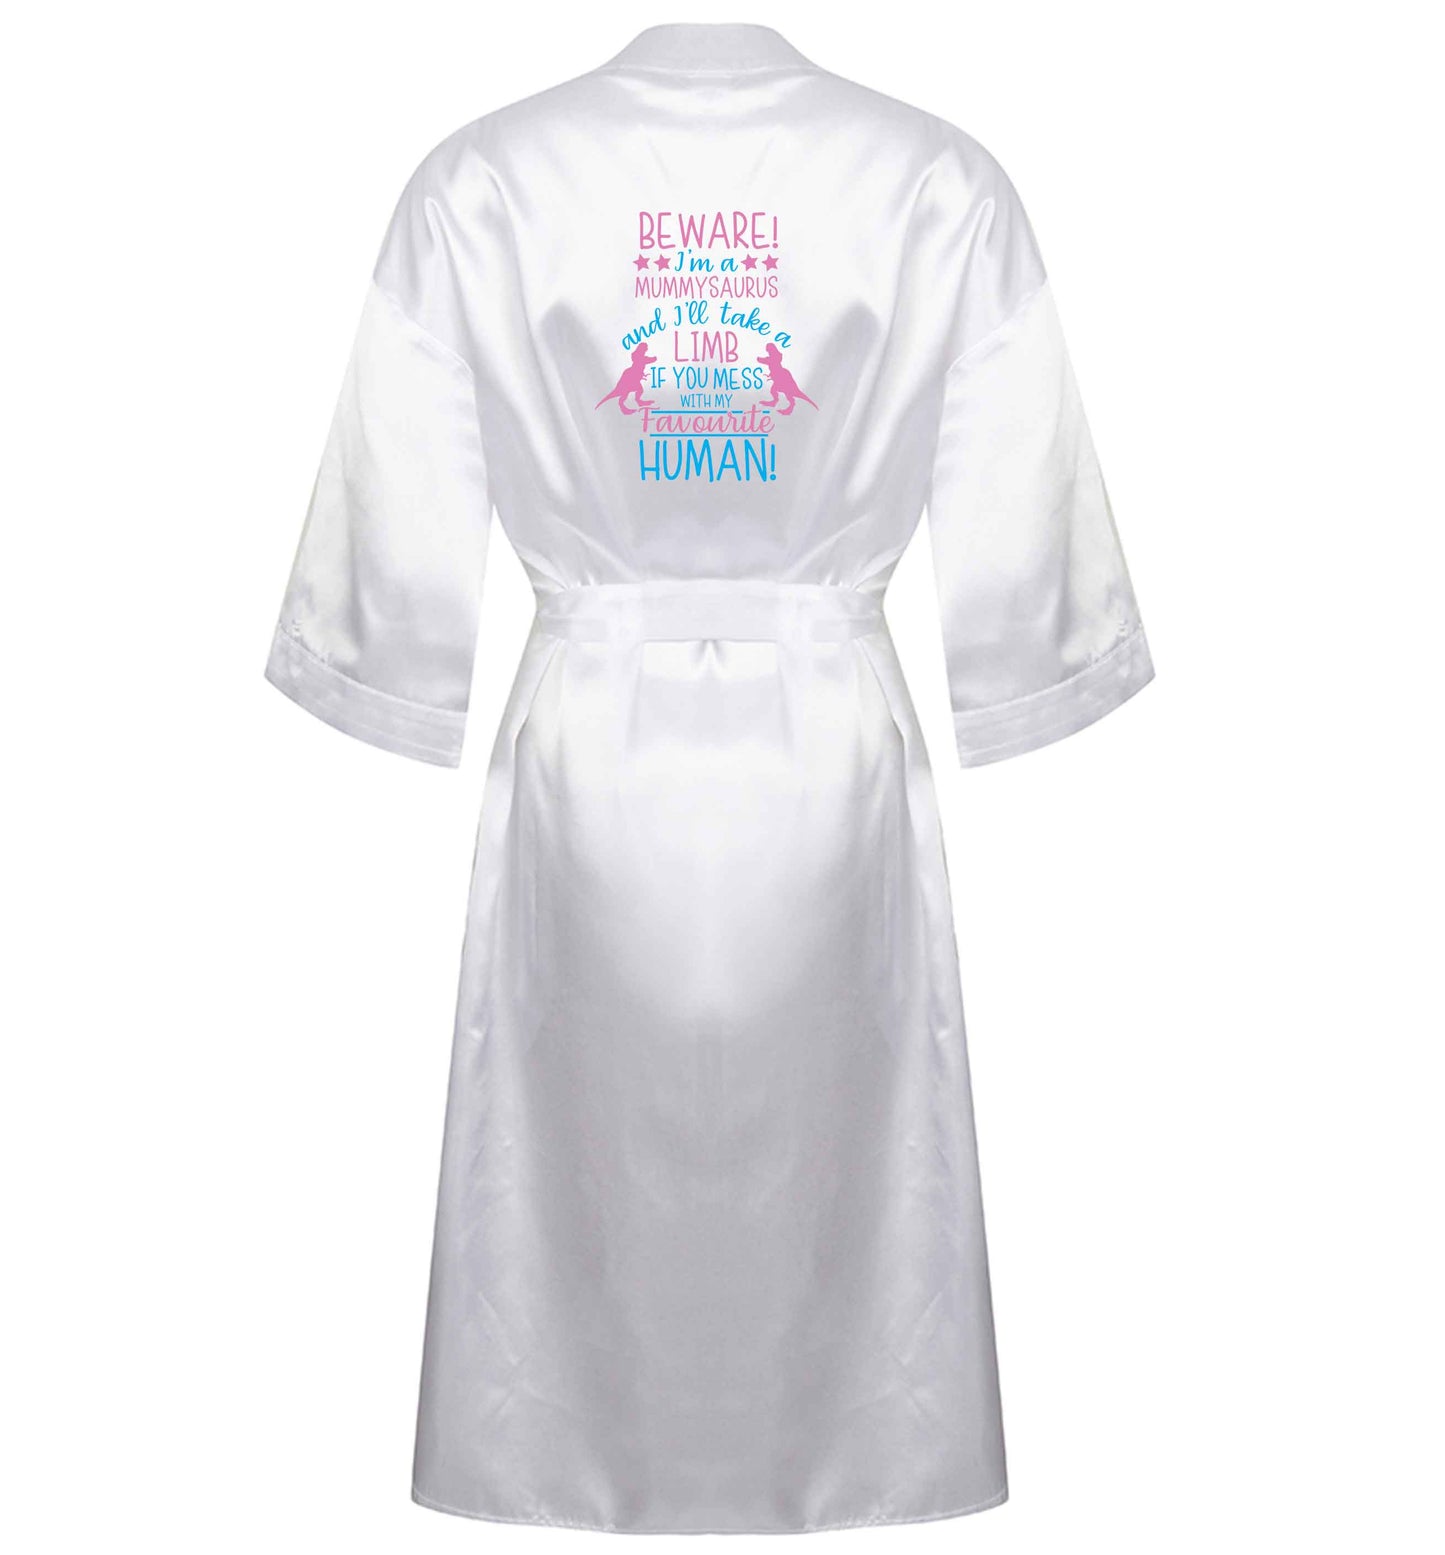 Perfect gift for any protective mummysaurus! Beware I'm a mummysaurus and I'll take a limb if you mess with my favourite human XL/XXL white ladies dressing gown size 16/18